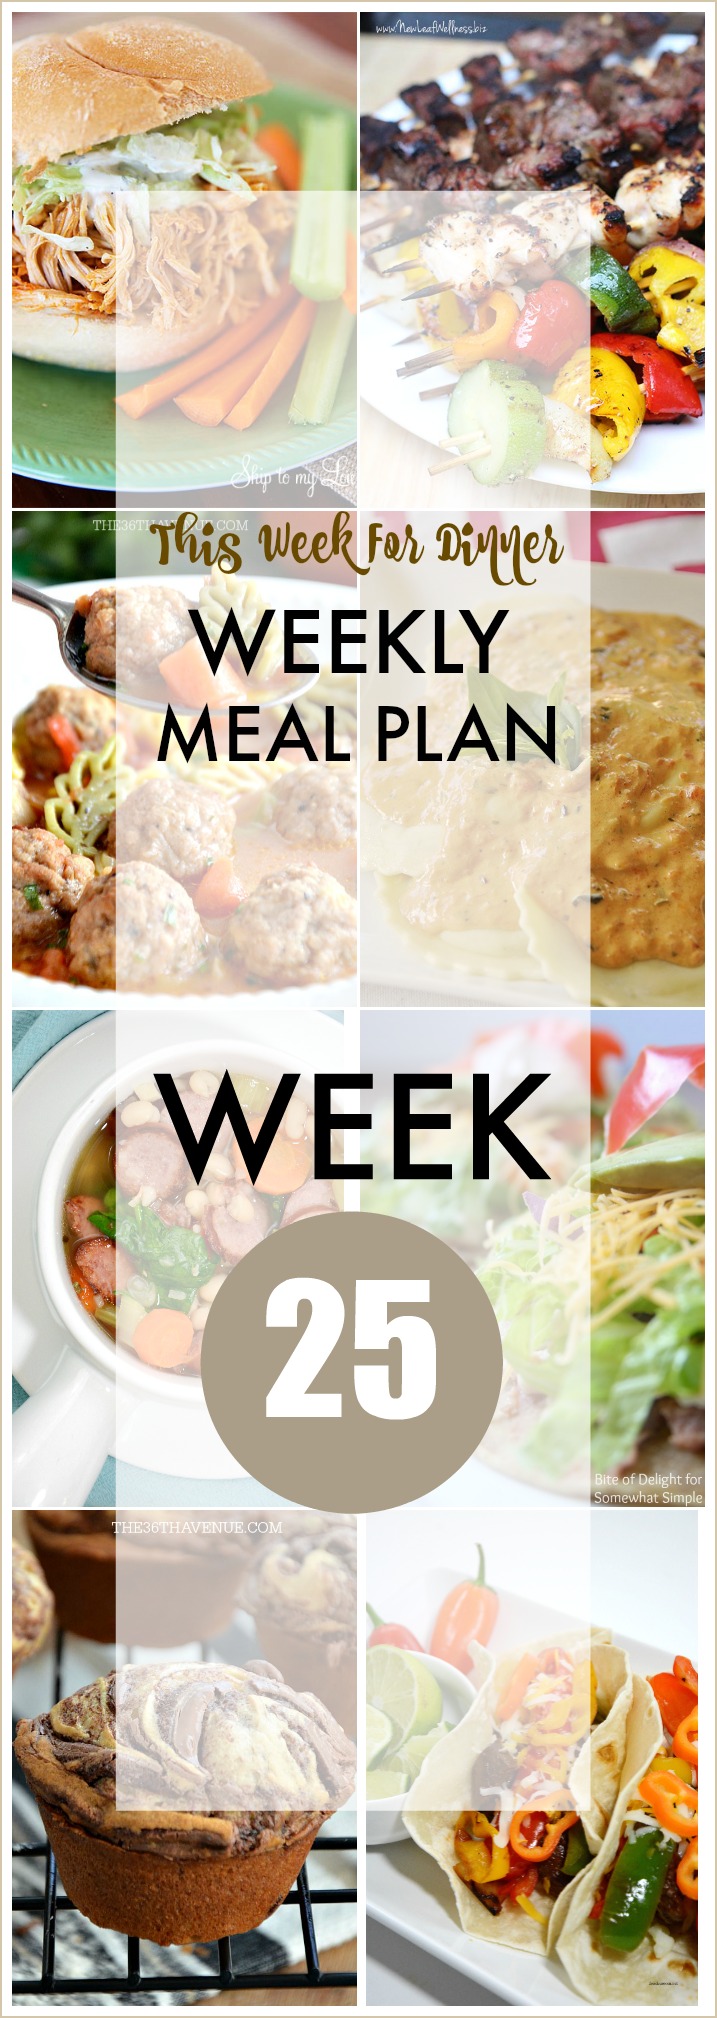 Easy Recipes - Easy and delicious recipes for the entire week. Main dishes, slow cooker recipes, and dessert.